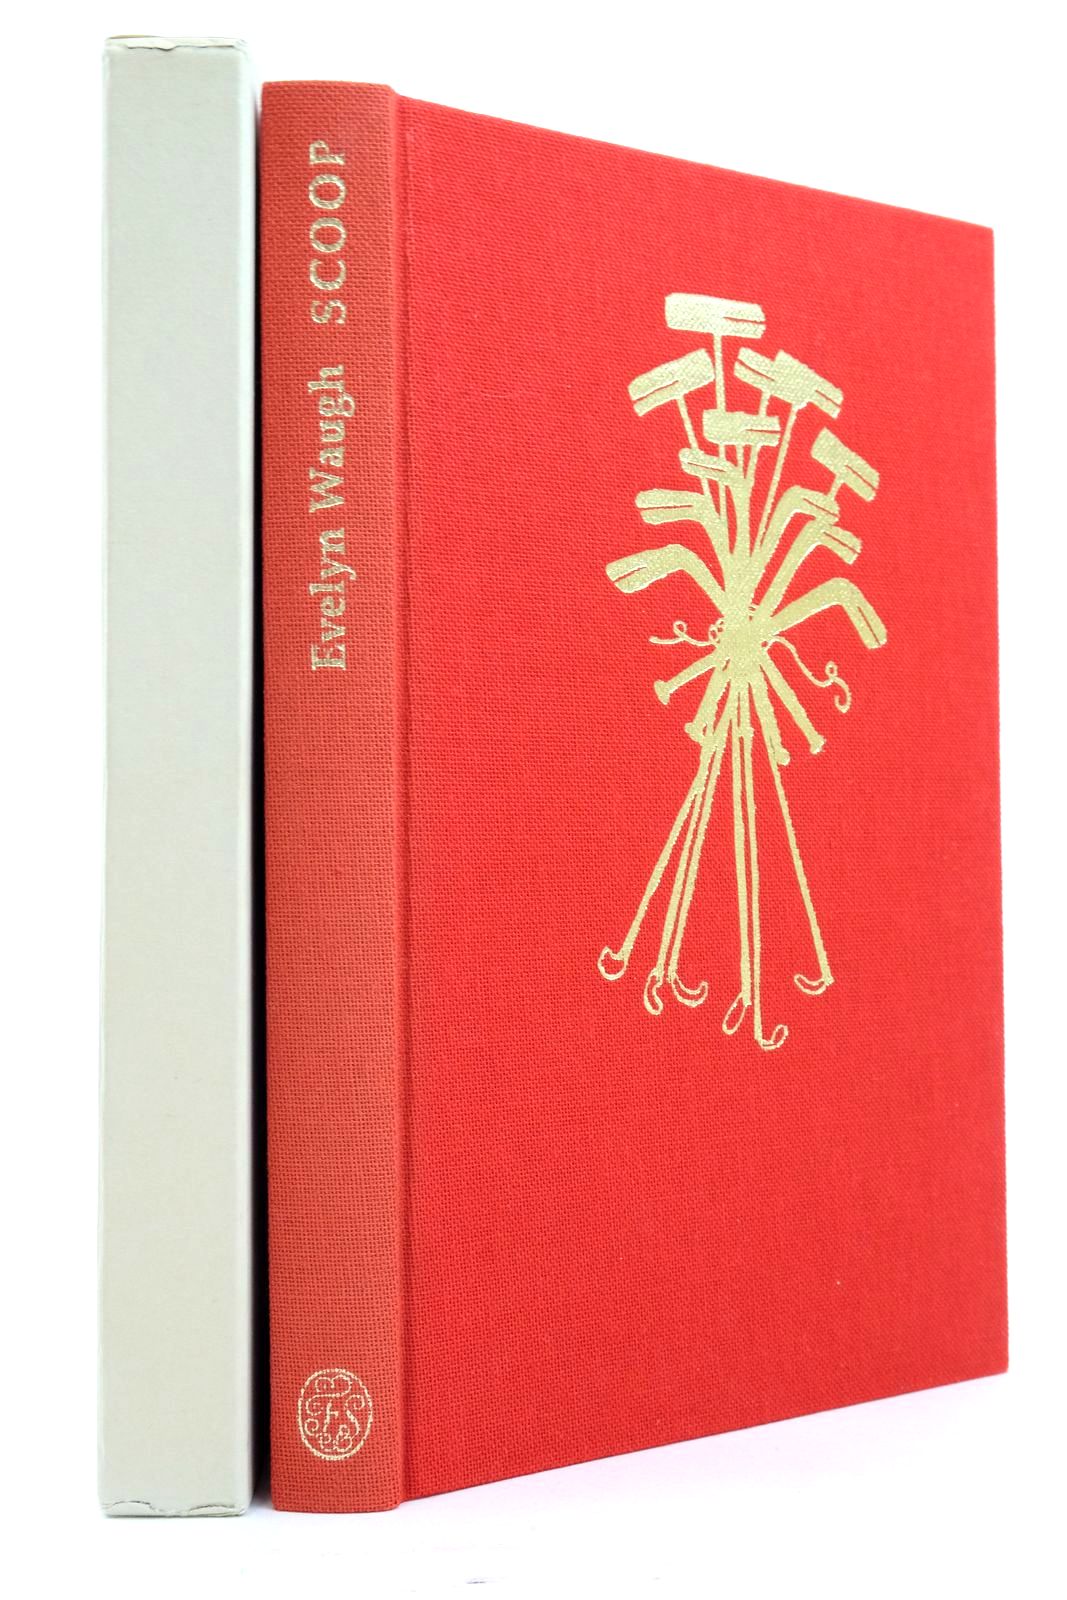 Photo of SCOOP written by Waugh, Evelyn Cameron, James illustrated by Blake, Quentin published by Folio Society (STOCK CODE: 2138179)  for sale by Stella & Rose's Books